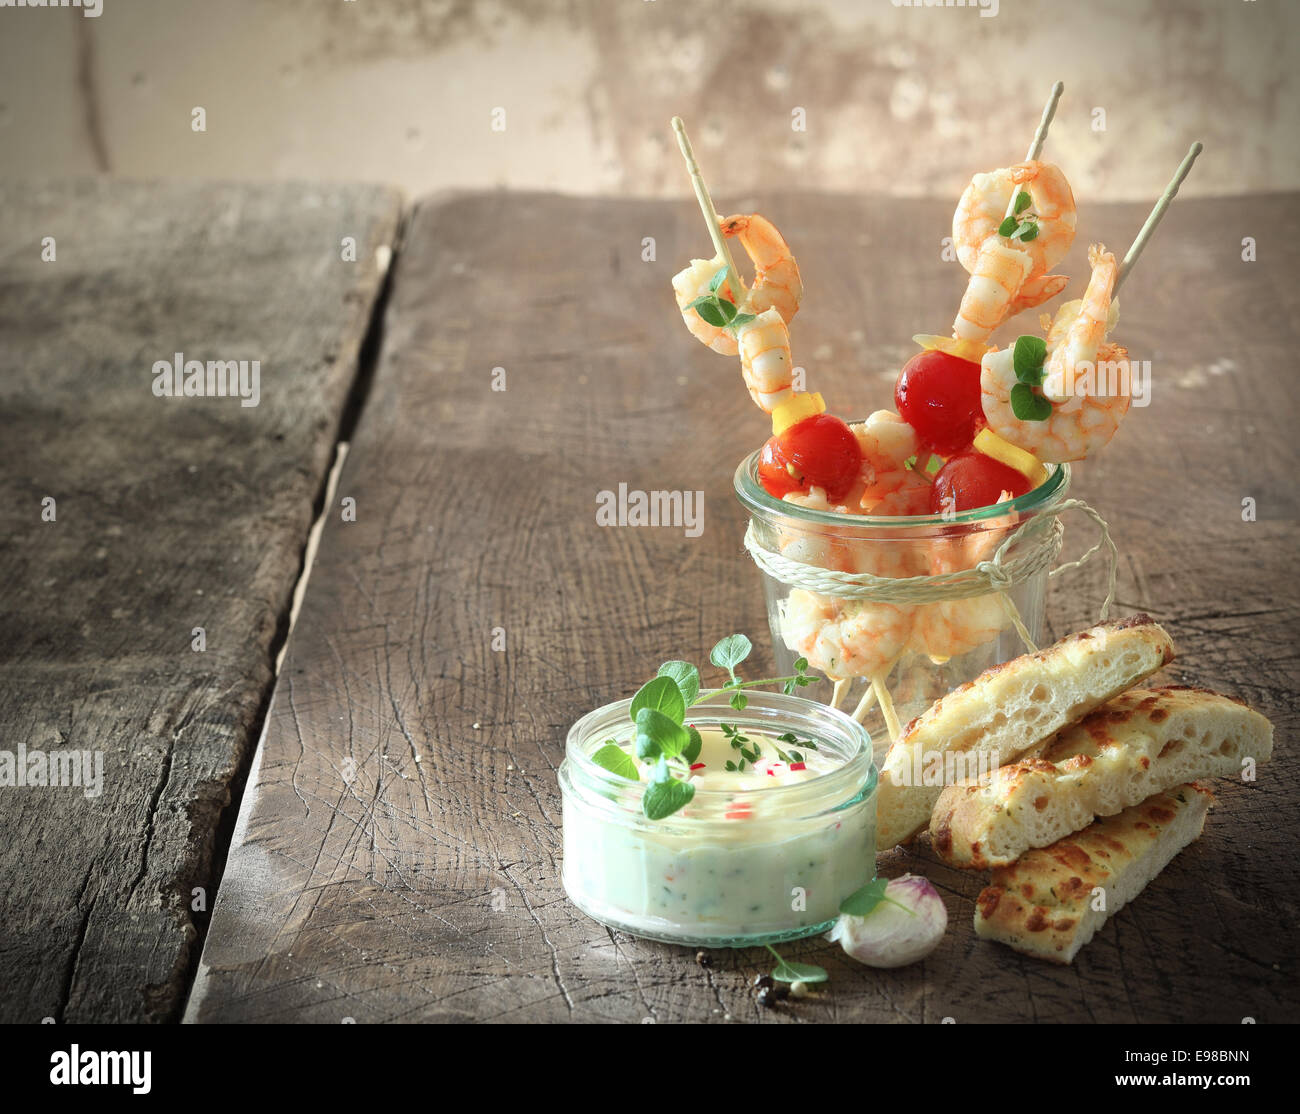 Tasty prawn or shrimp appetizers with tomatoes on skewers served with tartare sauce and fresh oven-baked Italian focaccia bread Stock Photo